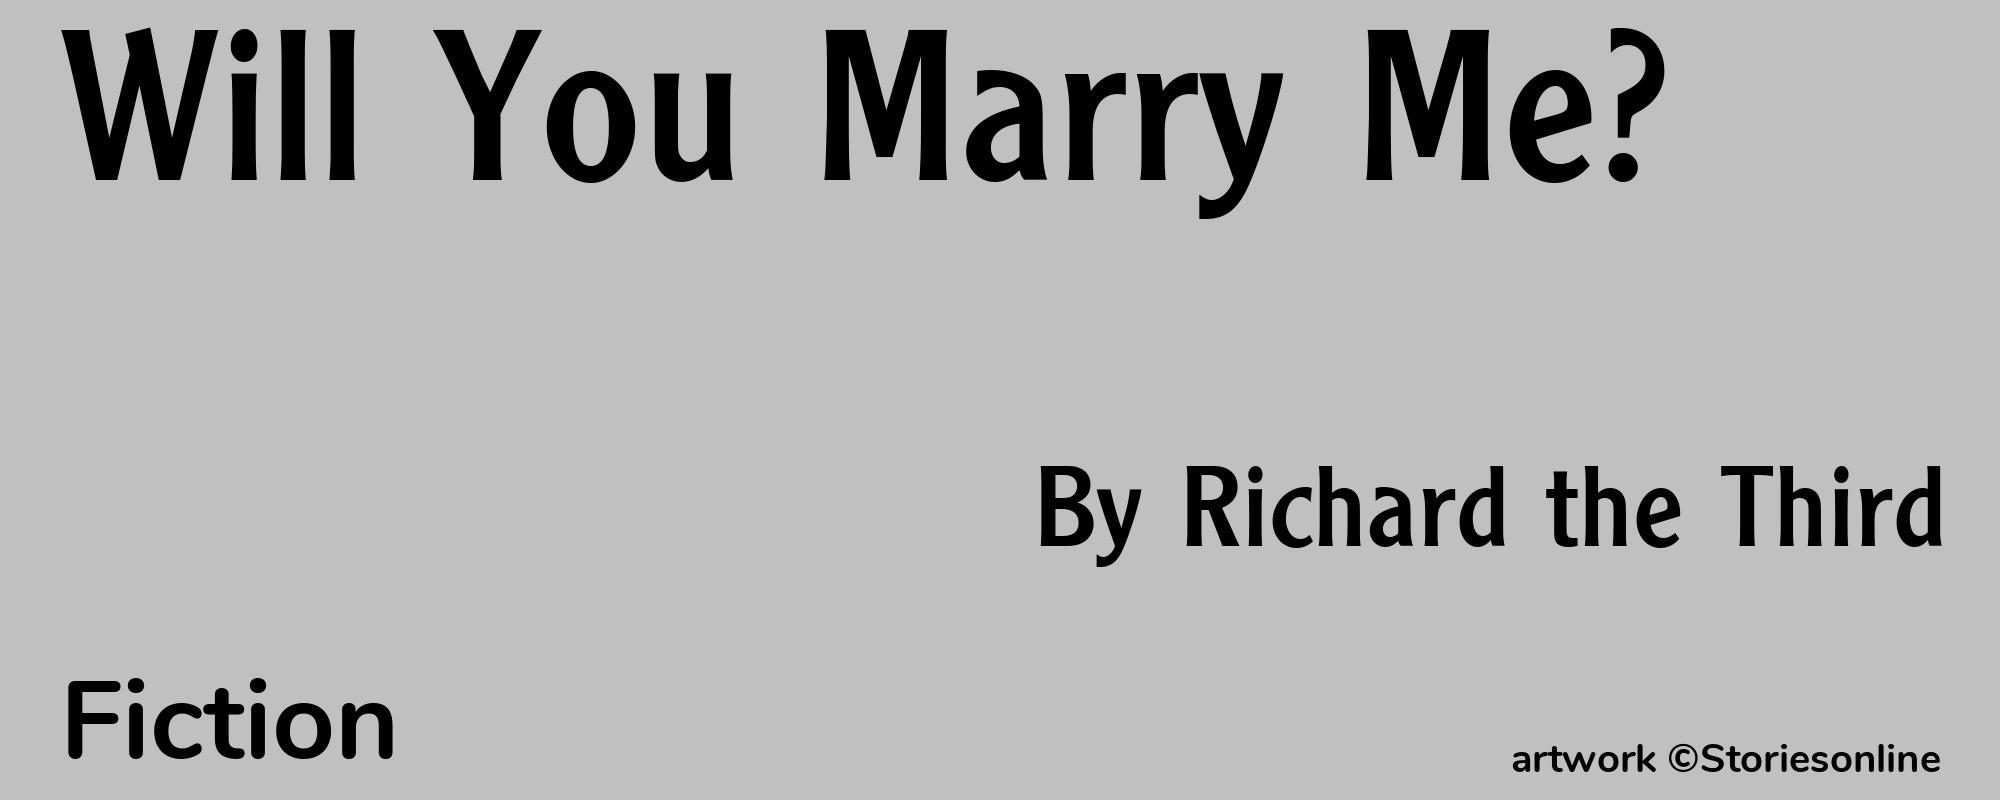 Will You Marry Me? - Cover